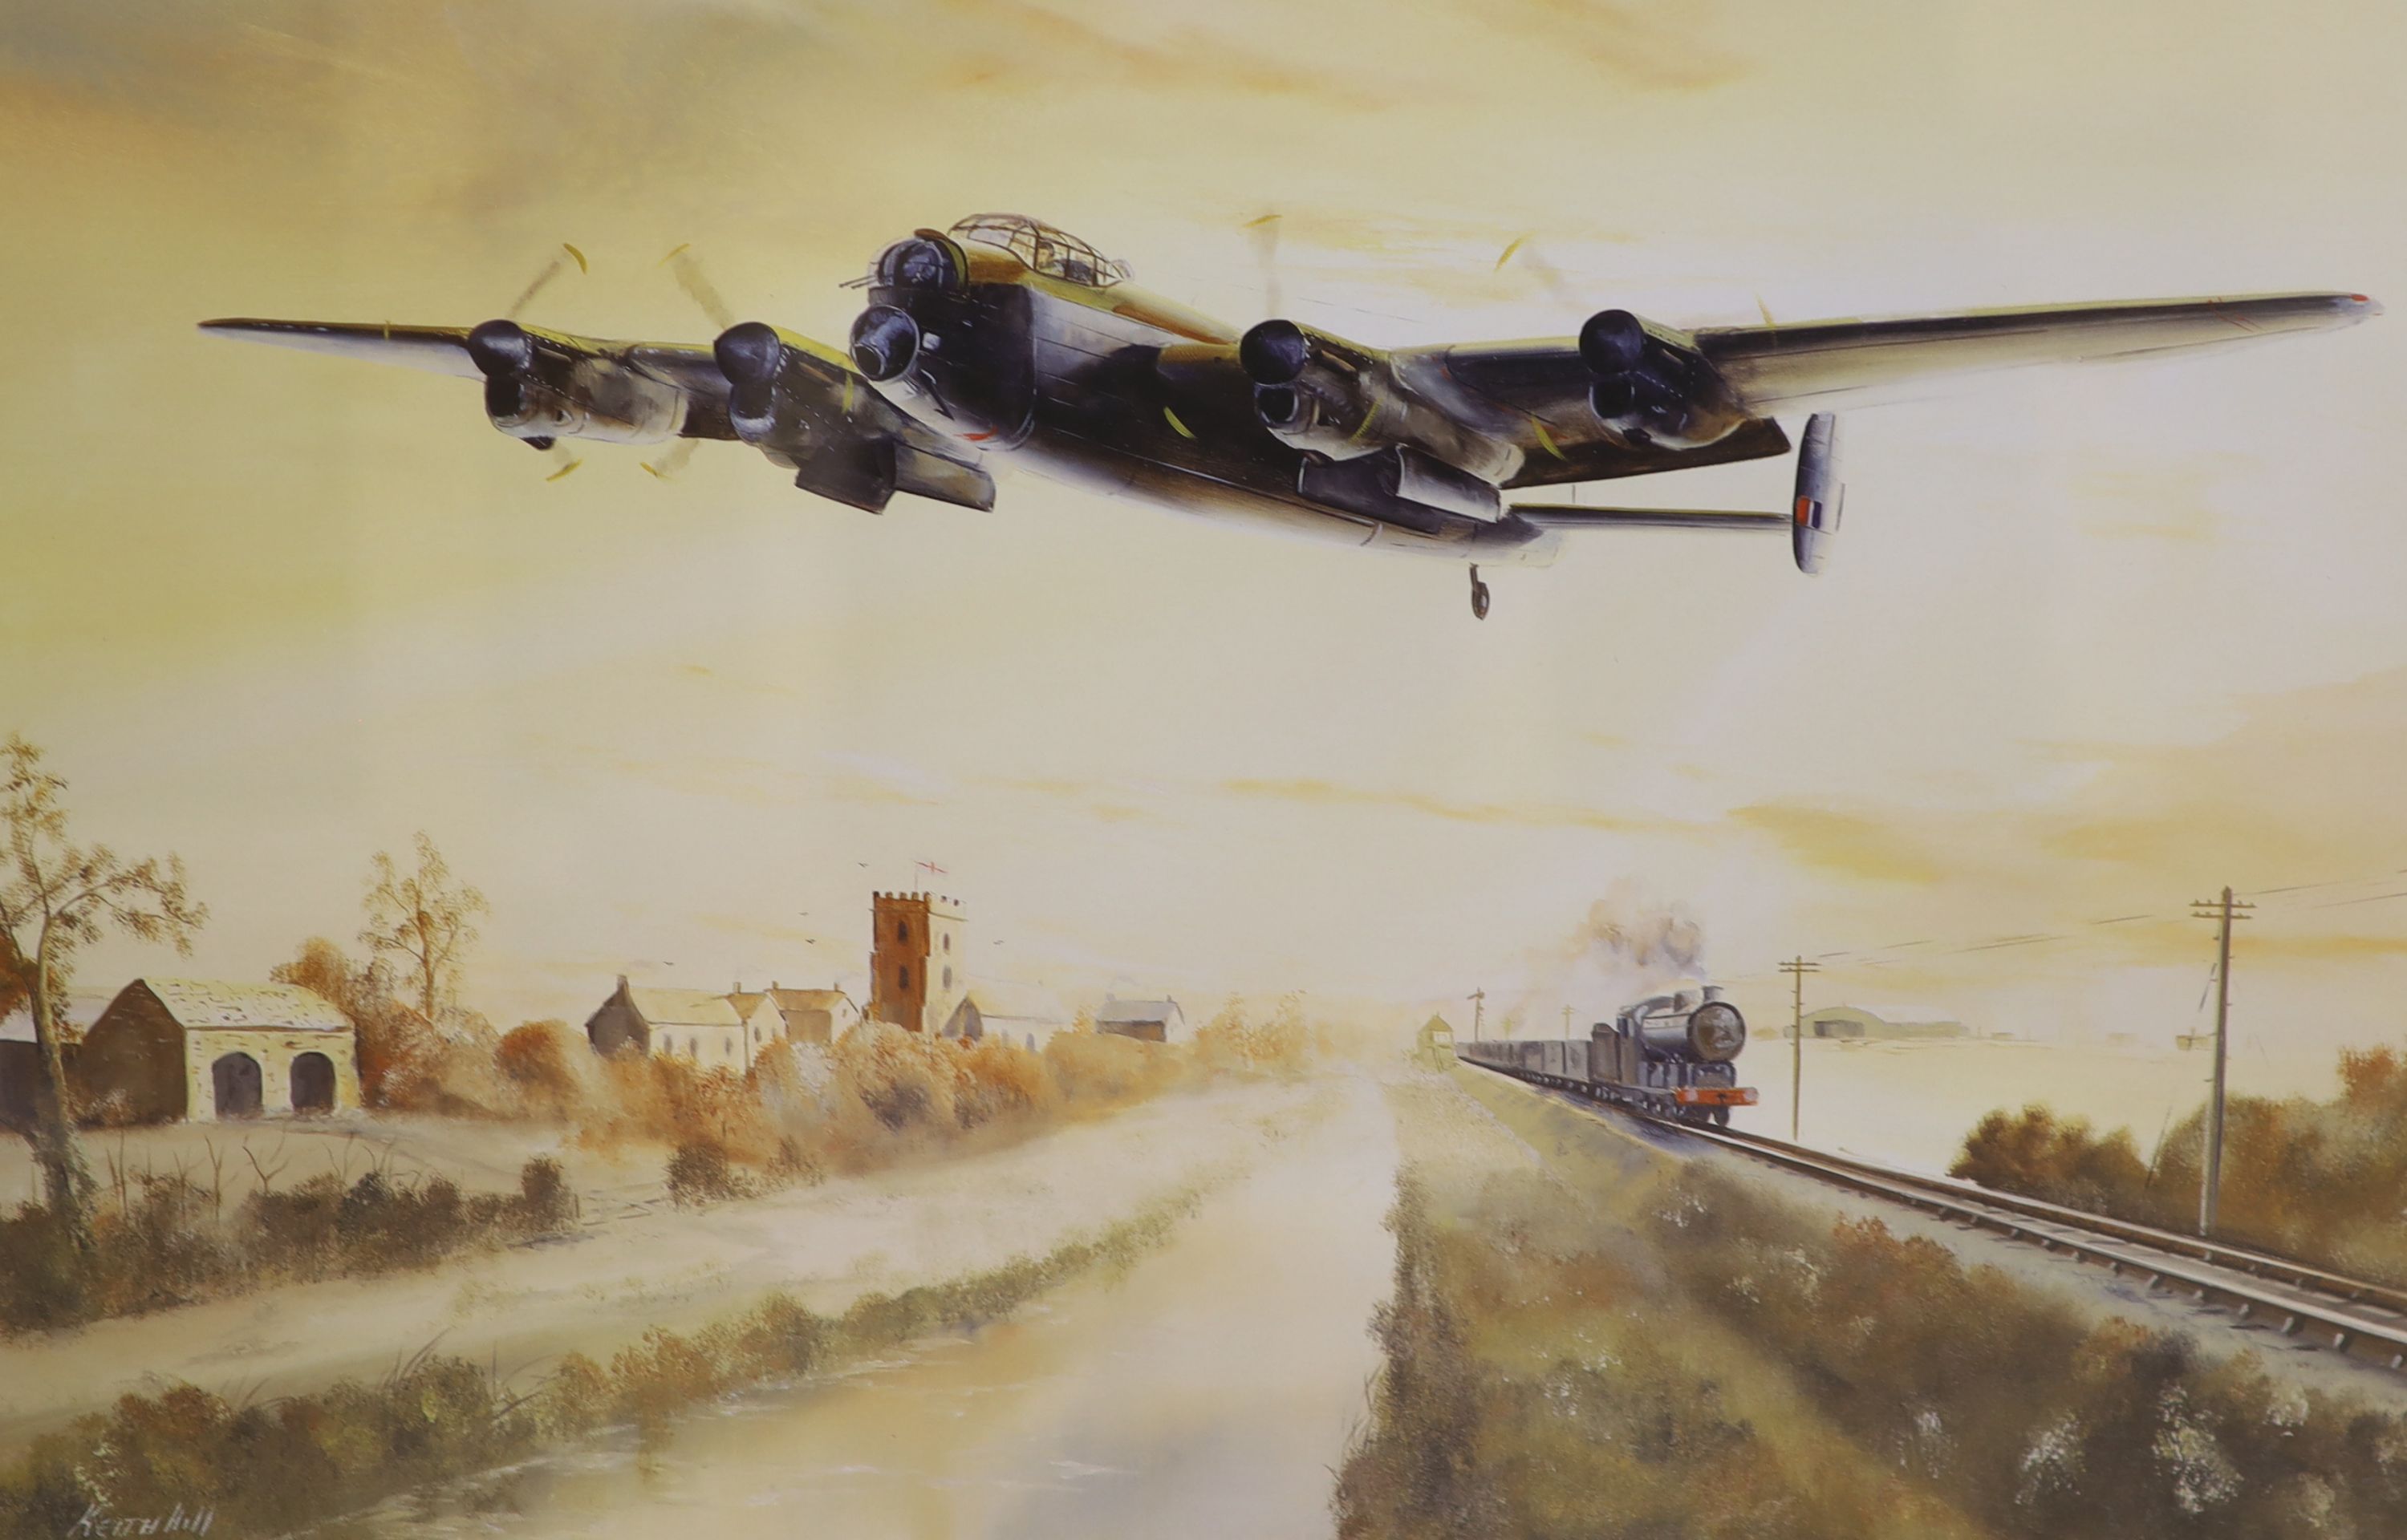 After Frank Wootton, limited edition coloured print, 'Battle Over London 1940', signed in pencil and numbered 224/1250 and two other aviation prints